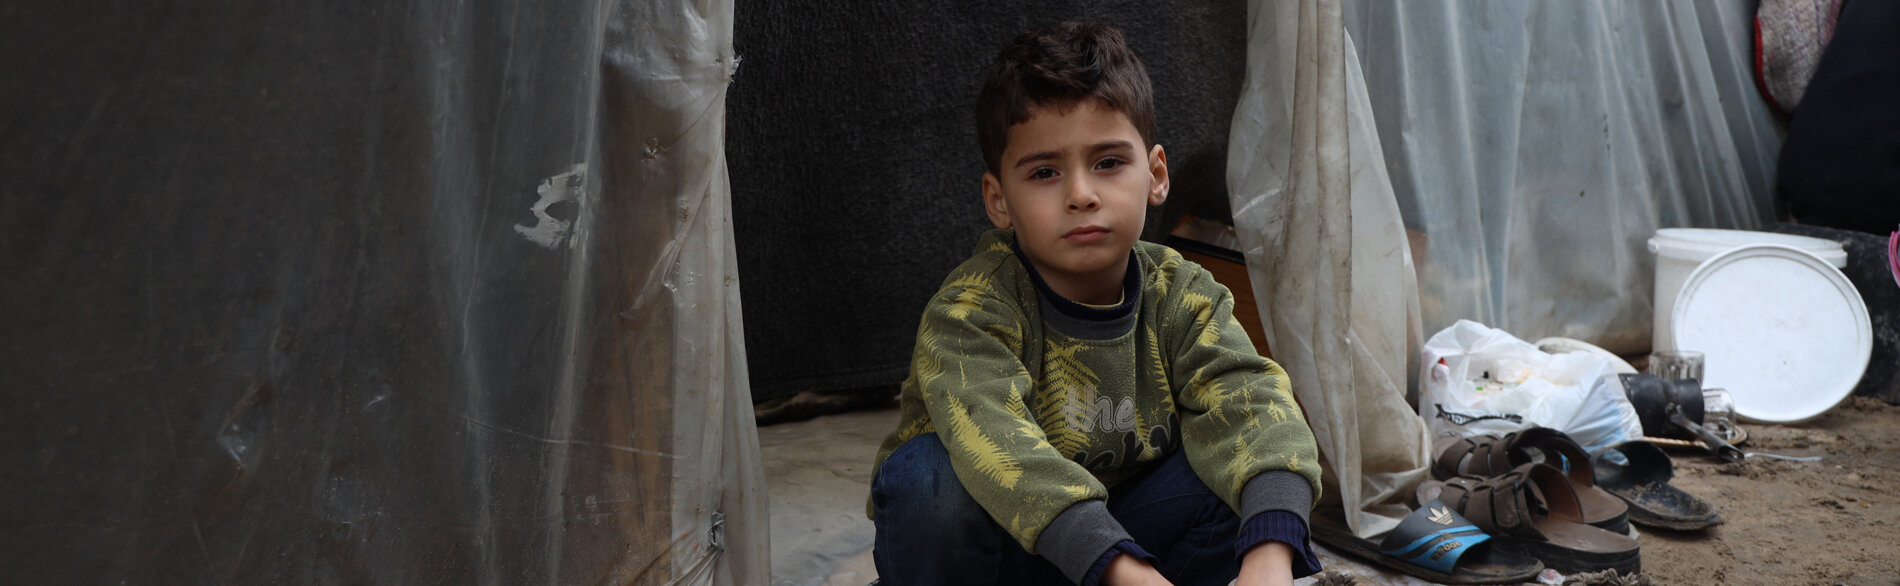 A Palestinian boy sitting next to a makeshift structure in an education facility where displaced families have taken refuge in Gaza. Photo by UNICEF/El Baba